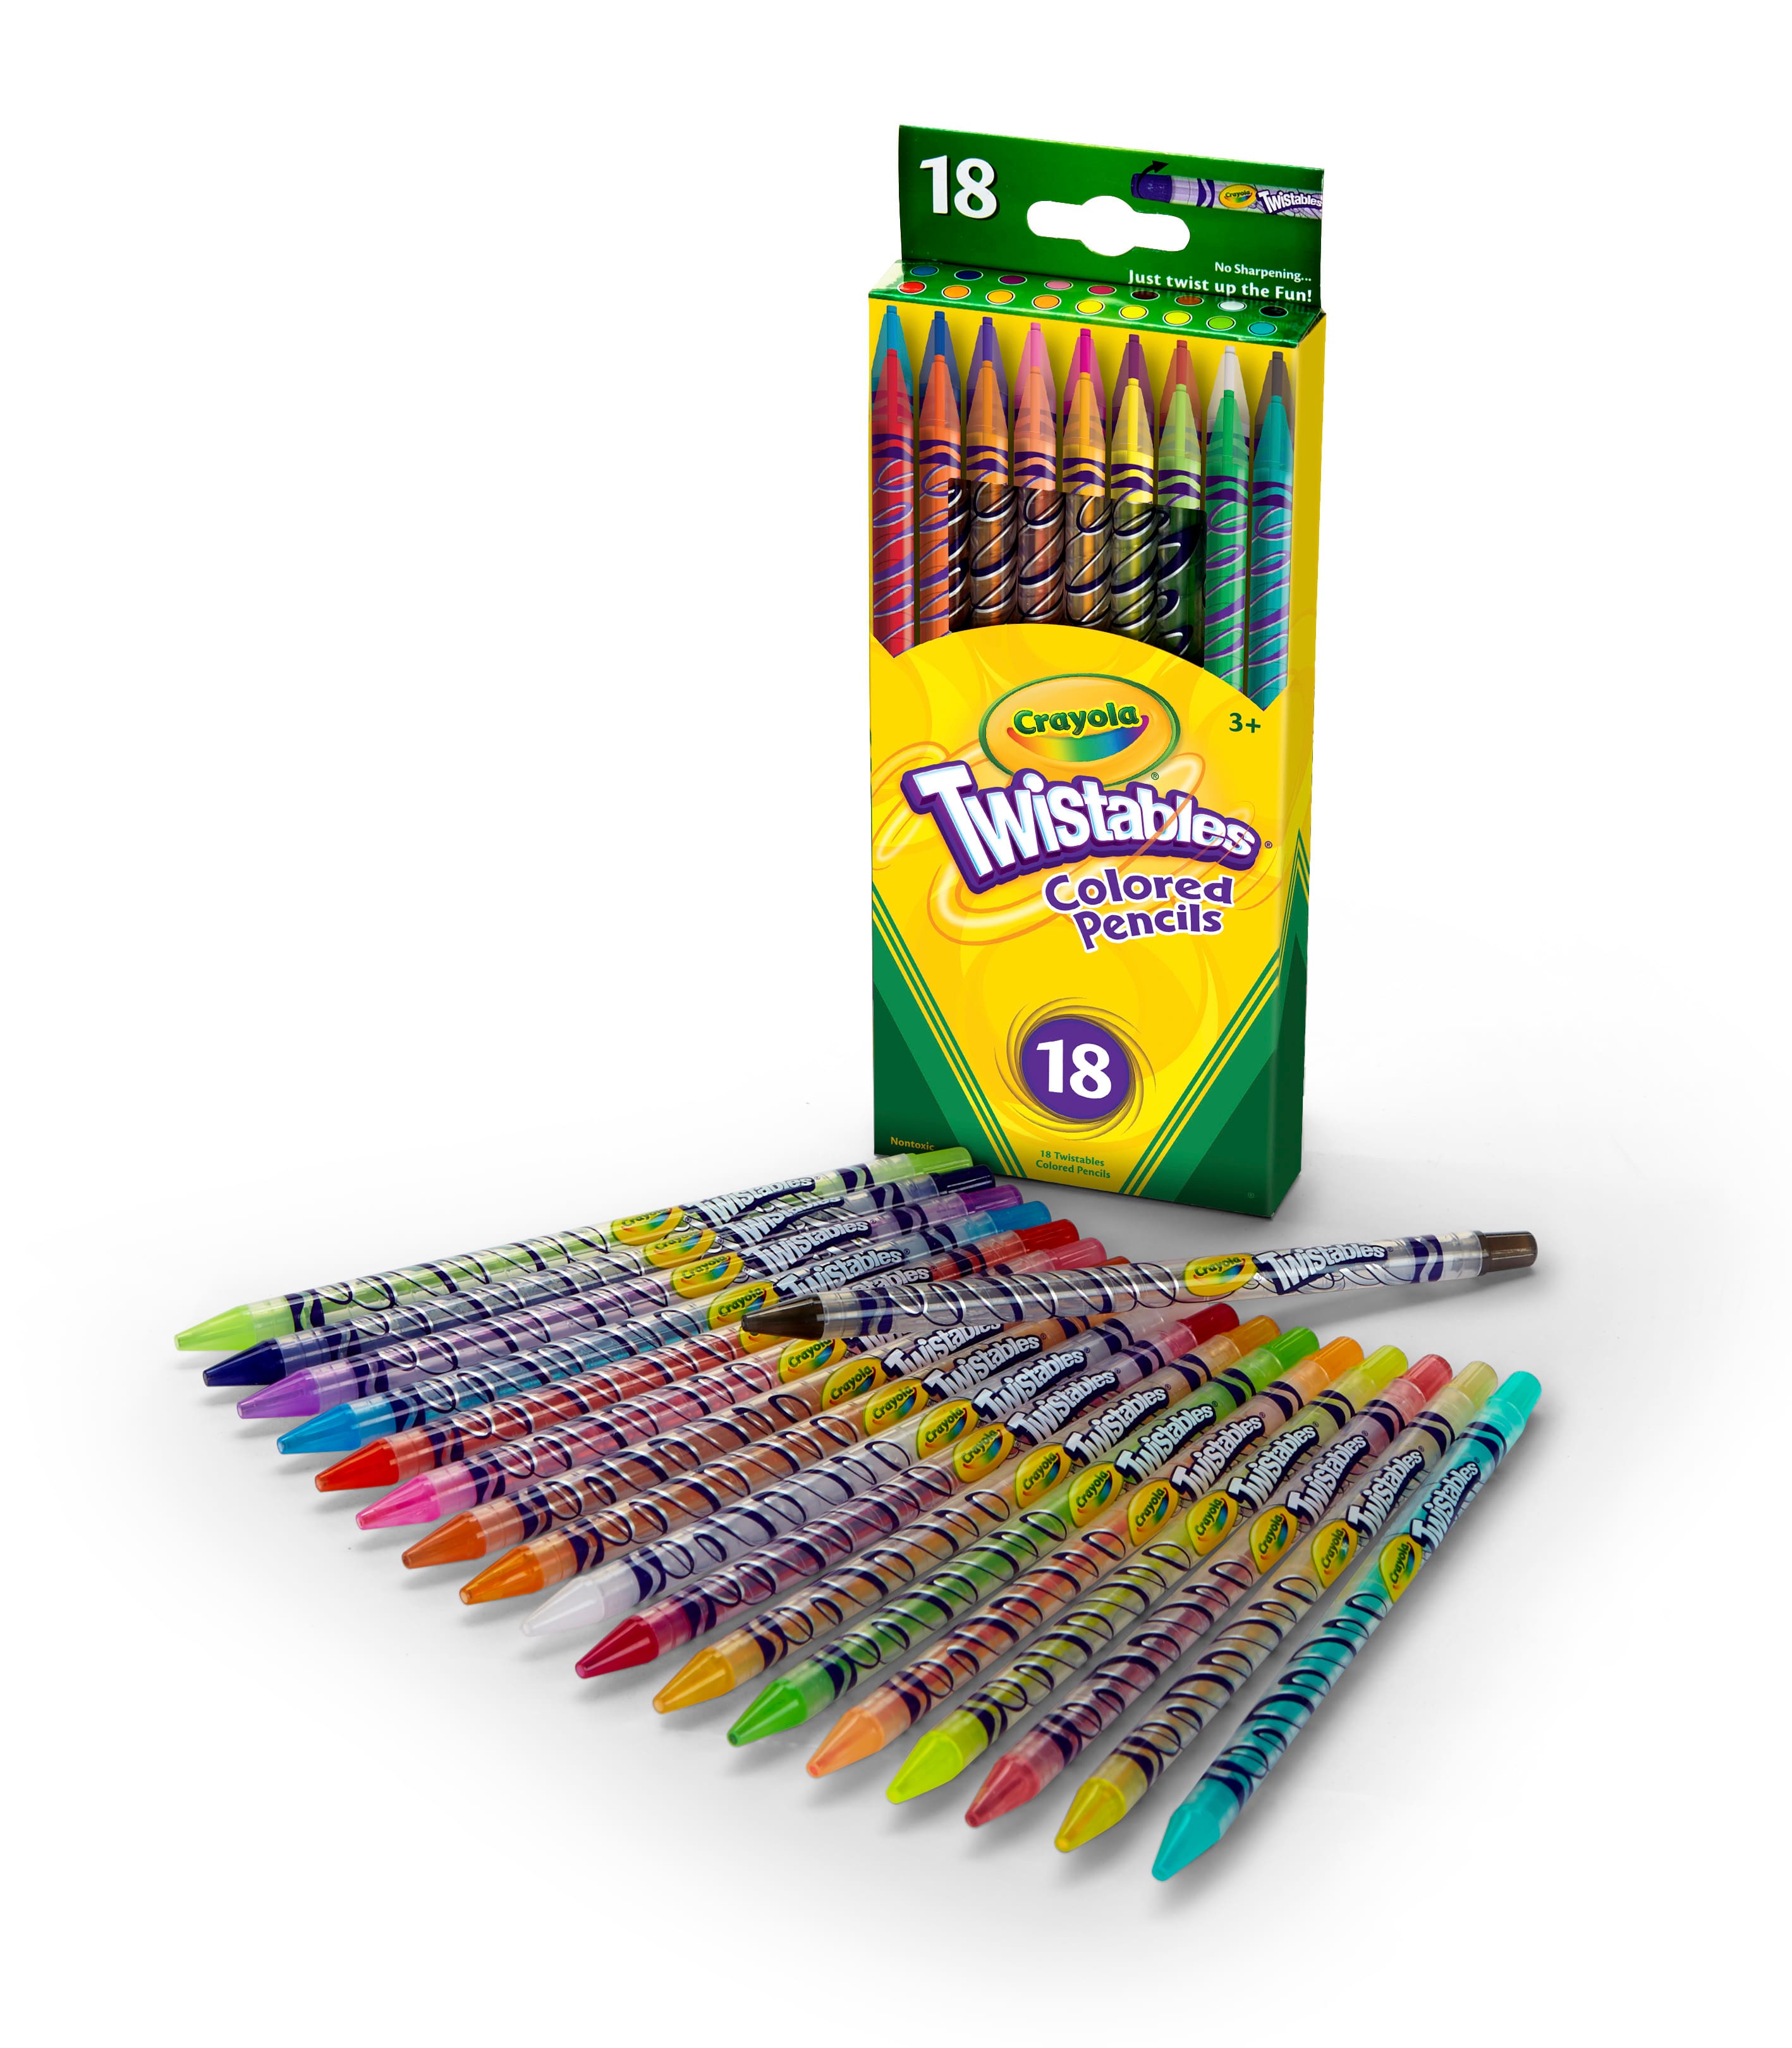 12 Packs: 18 ct. (216 total) Crayola Twistables Colored Pencils